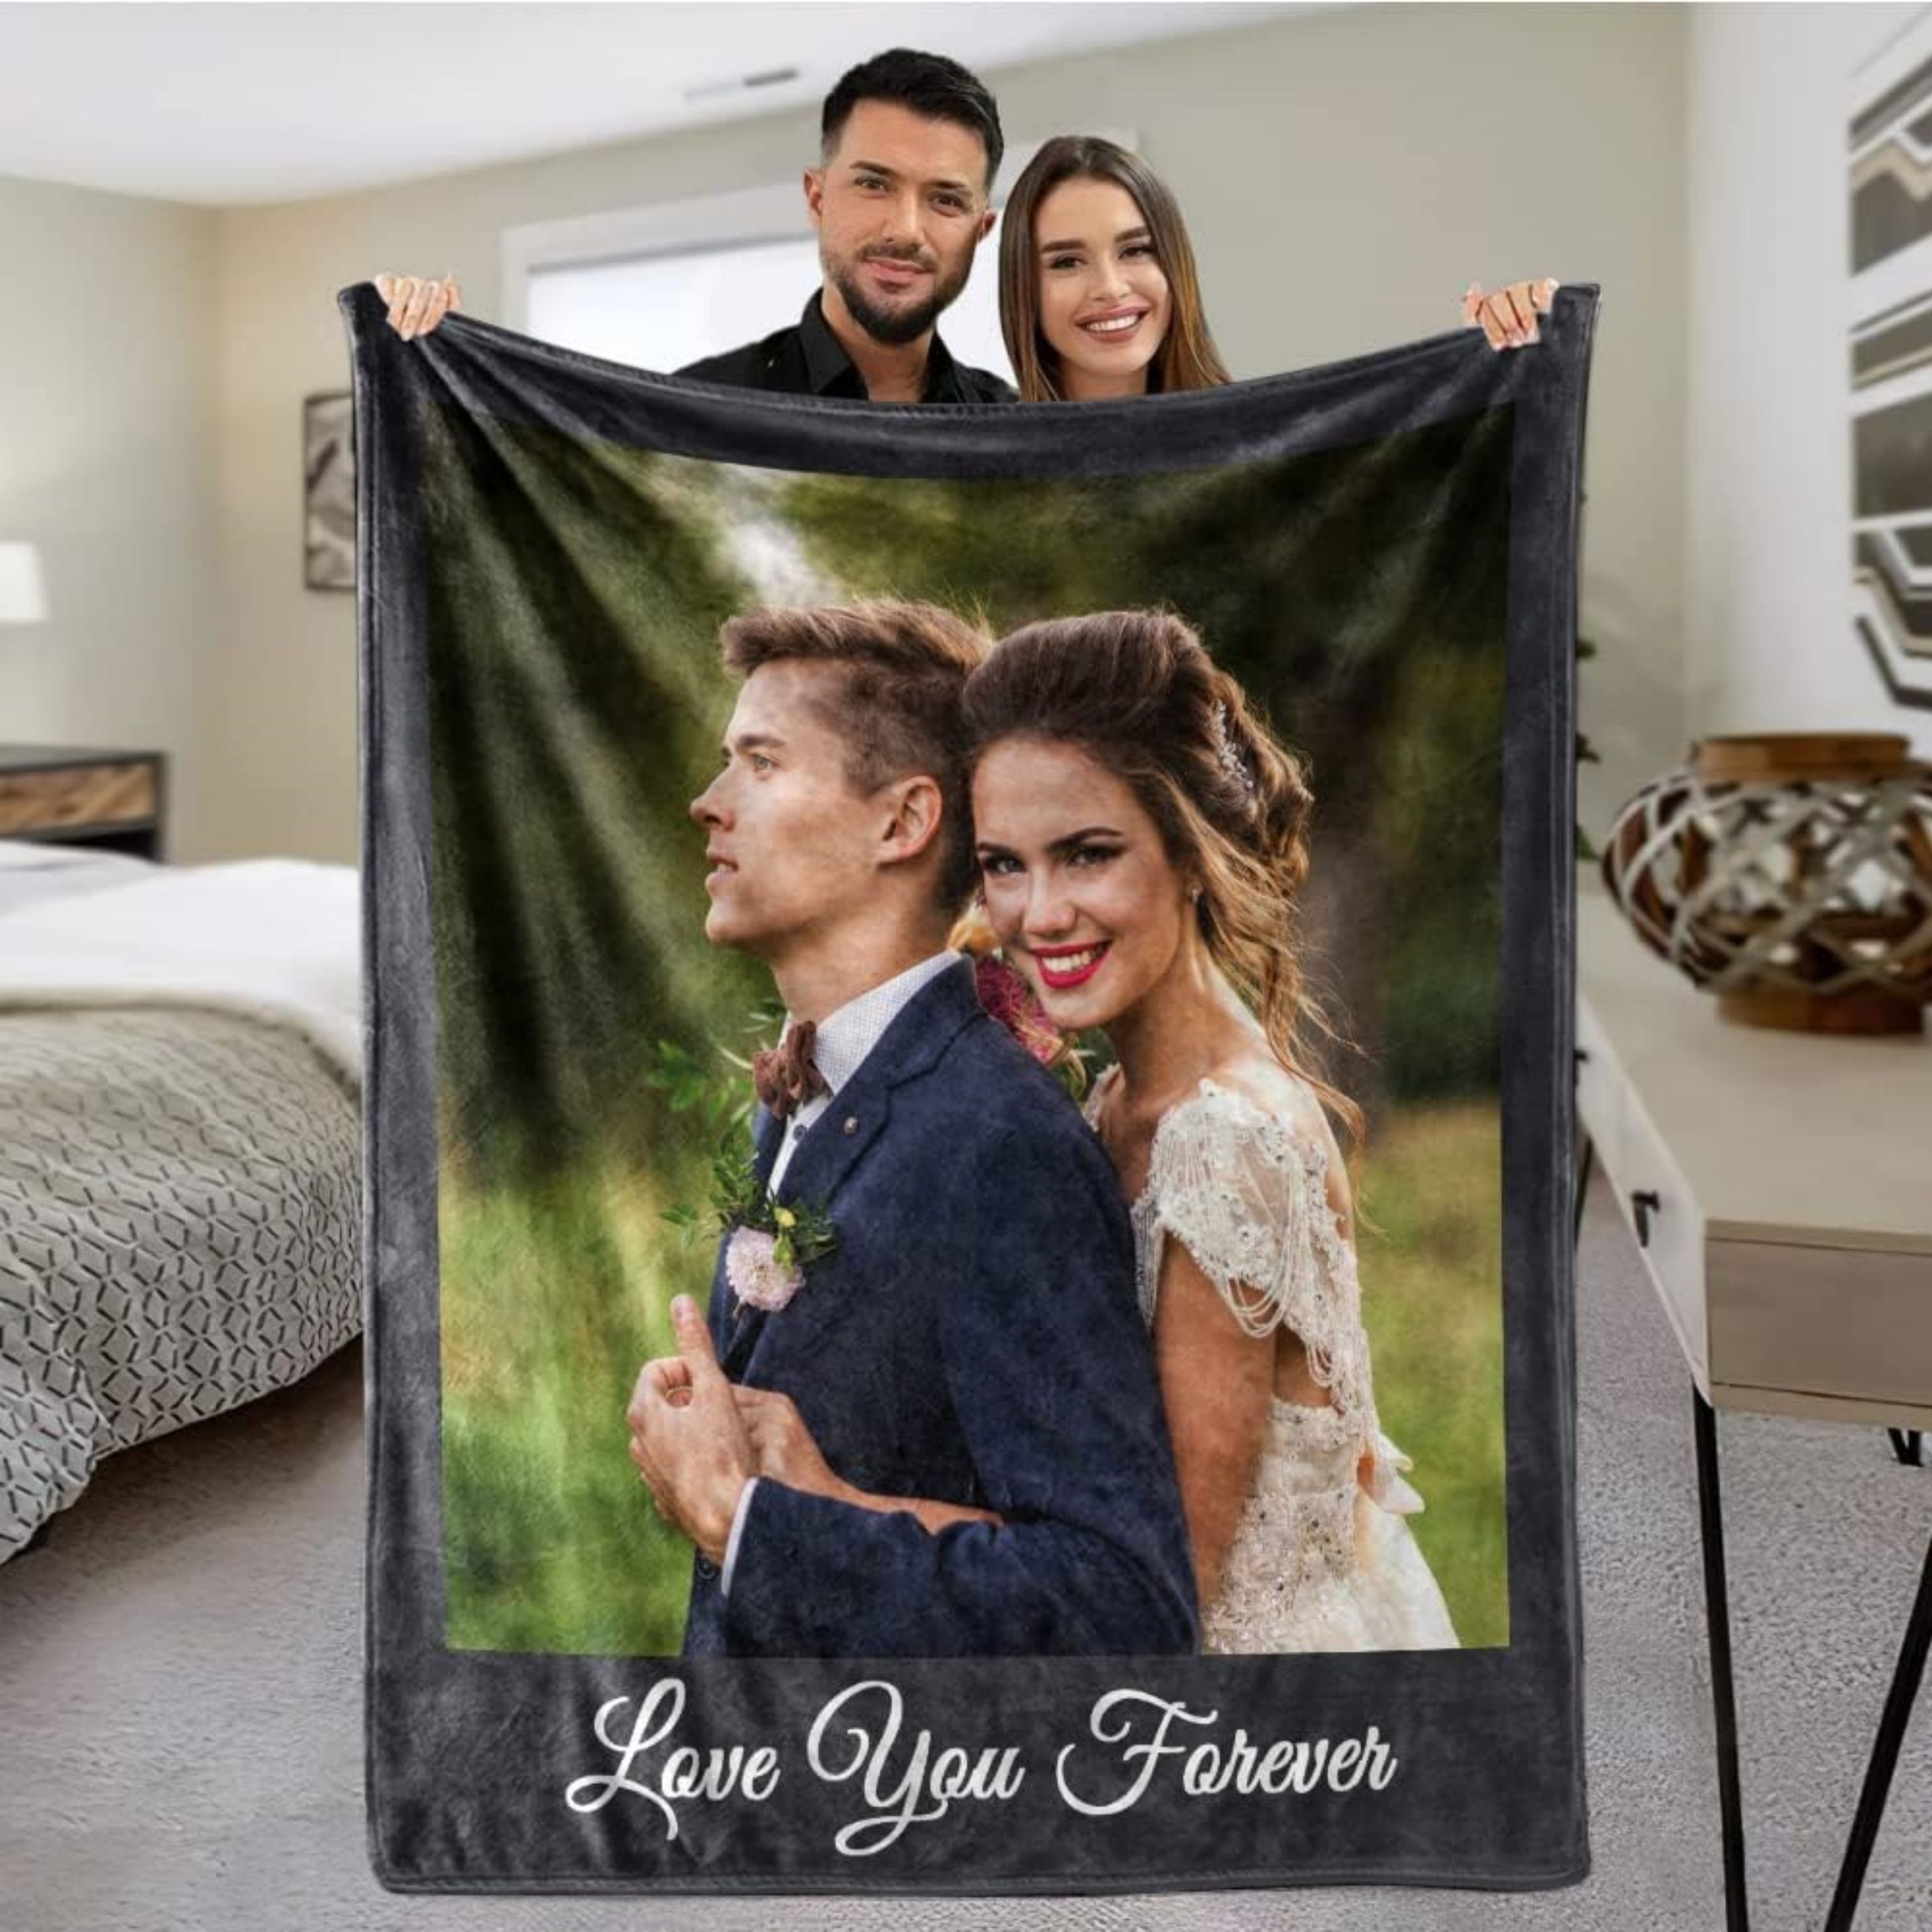 

Custom Car Interior Blankets With Photos Personalized Couples Gifts Customized Picture Blanket I Love You Gifts Birthday Gift For Wife Husband Girlfriend Boyfriend, 130x150m/50x60in